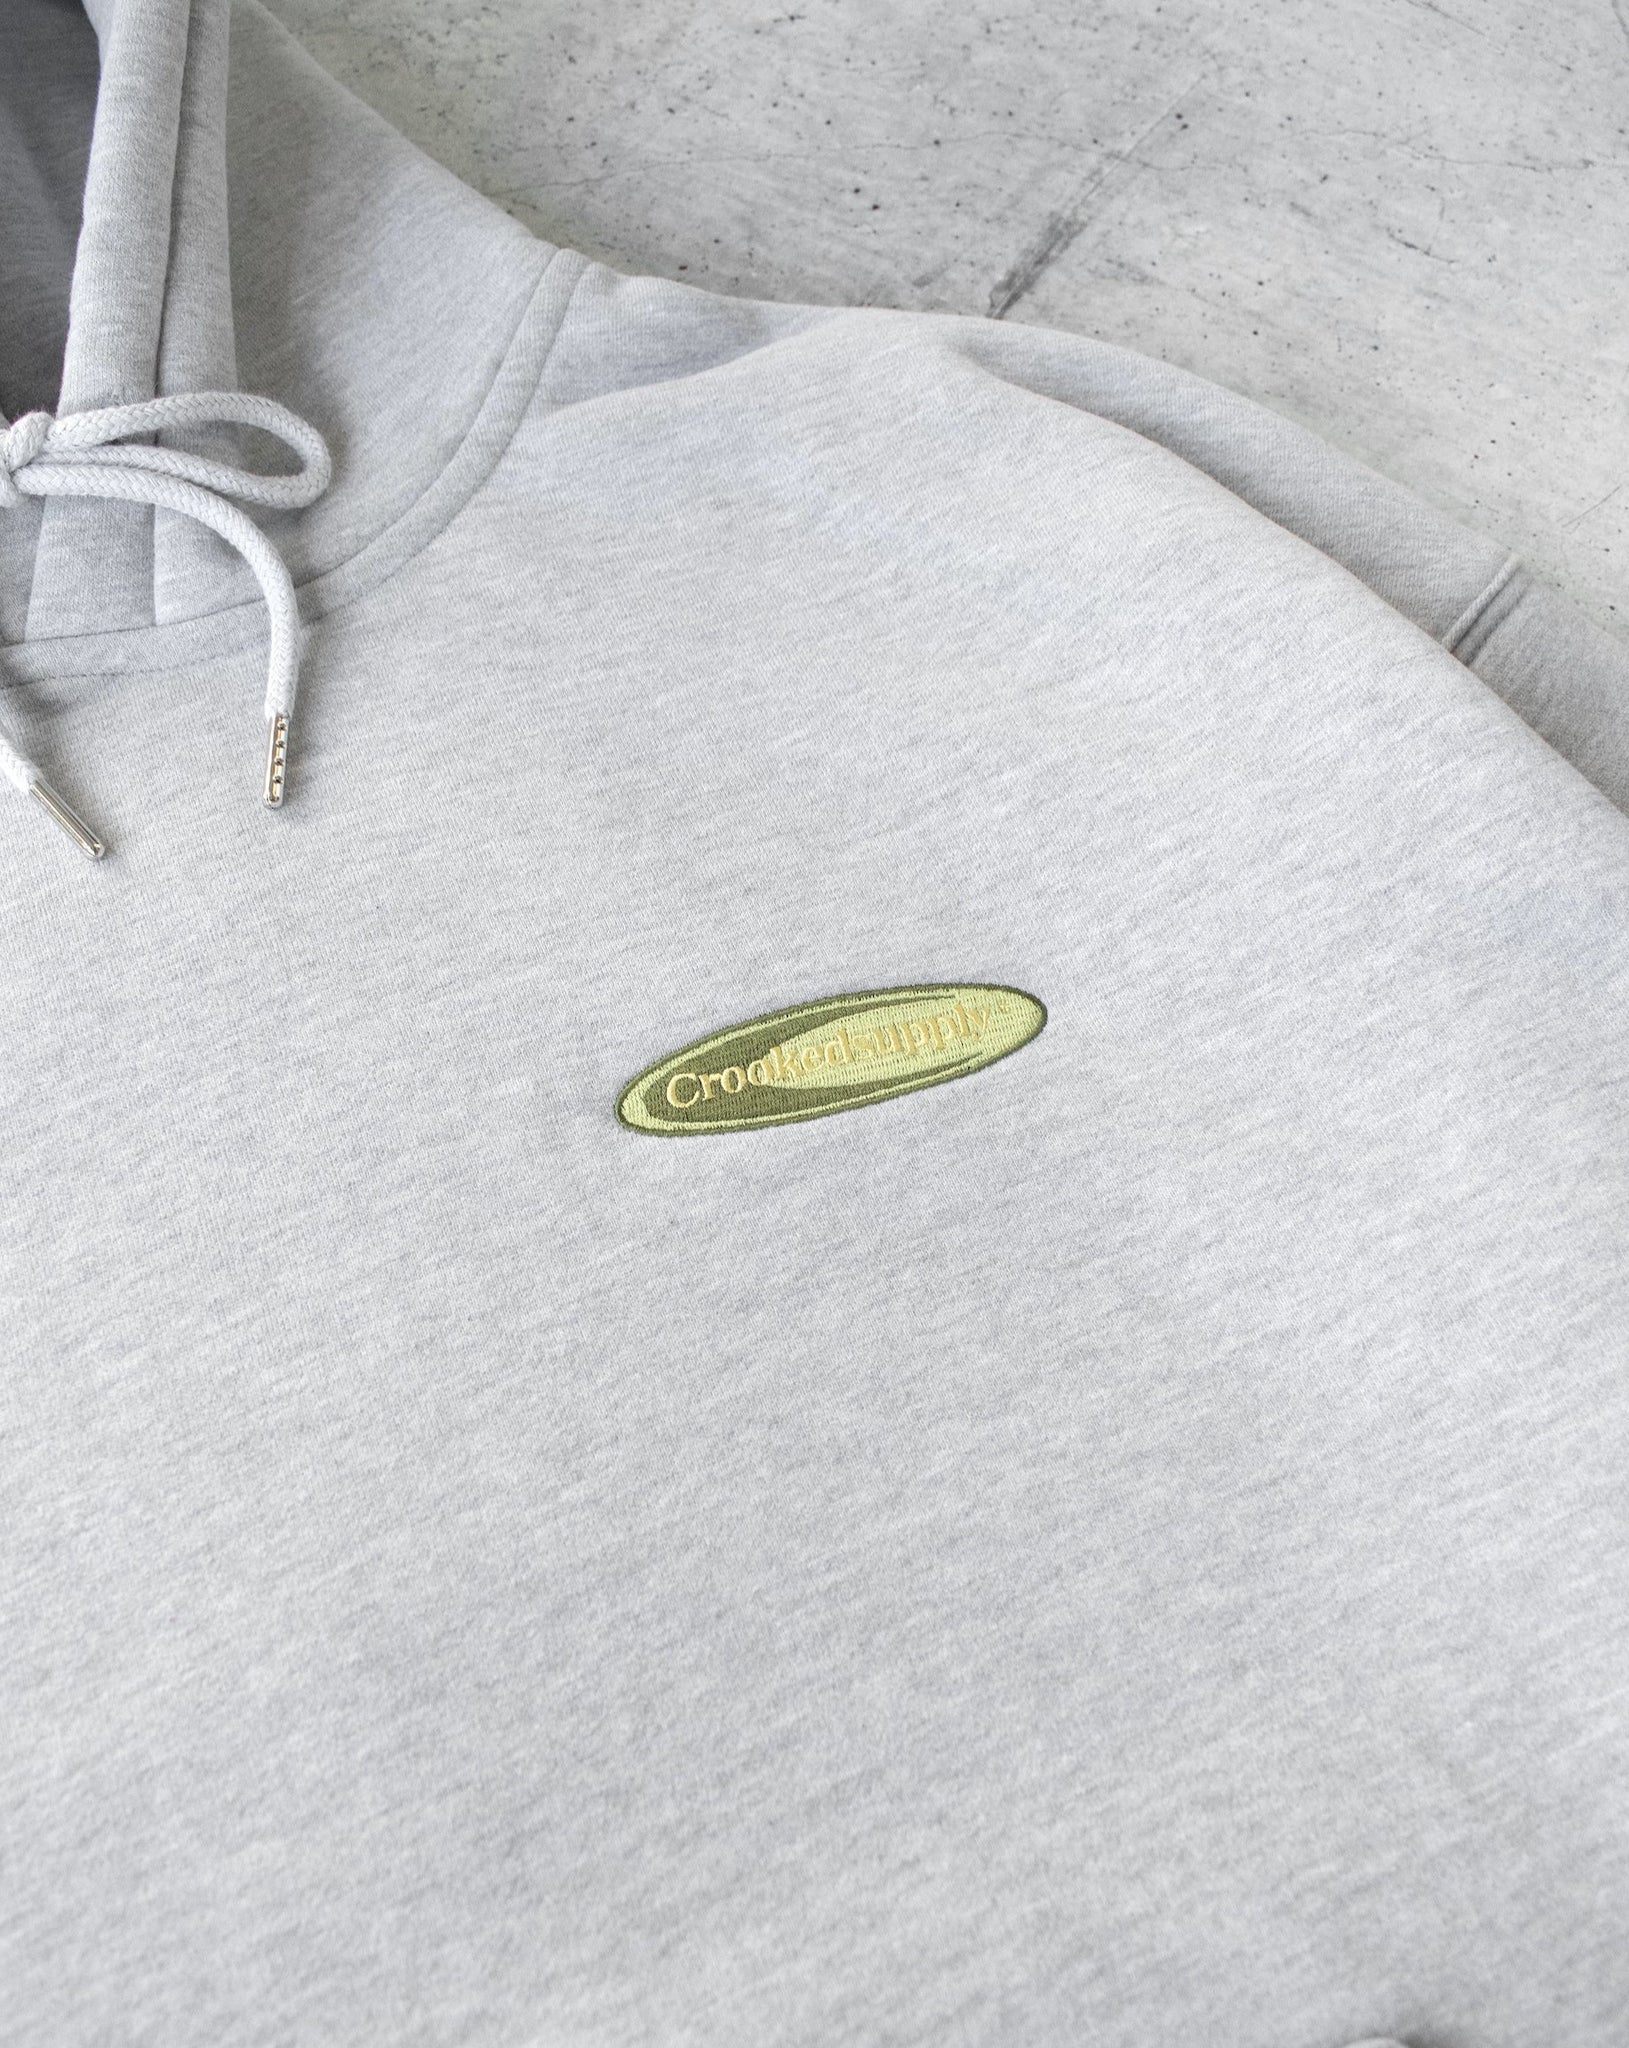 (New) Badge Hoodie - Heather Grey (Embroidered & Screen-Print)